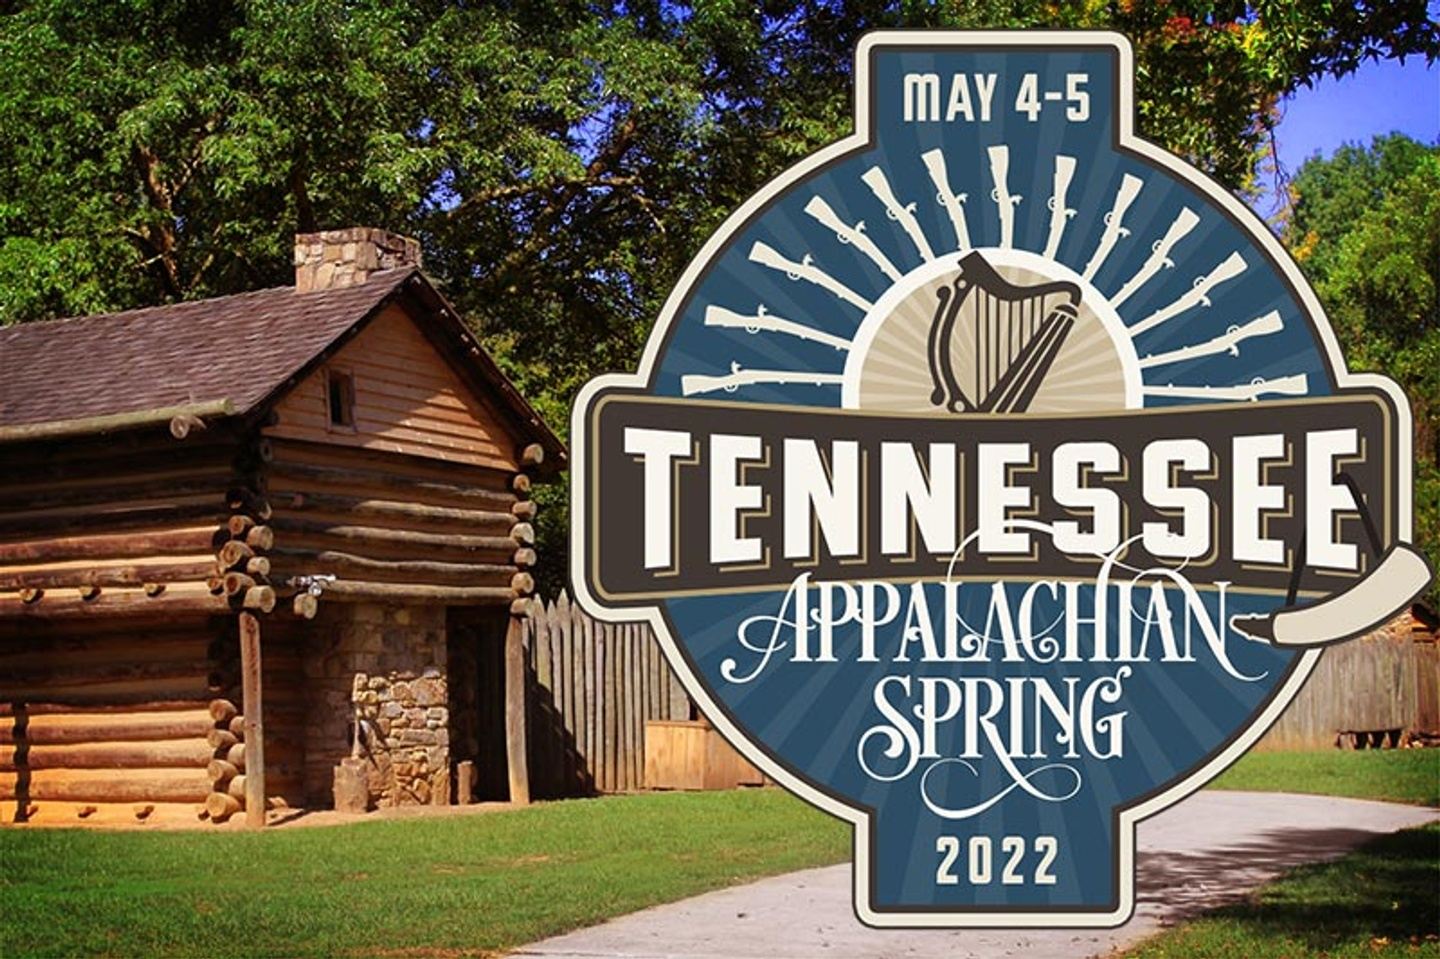 Tennessee Appalachian Spring tour